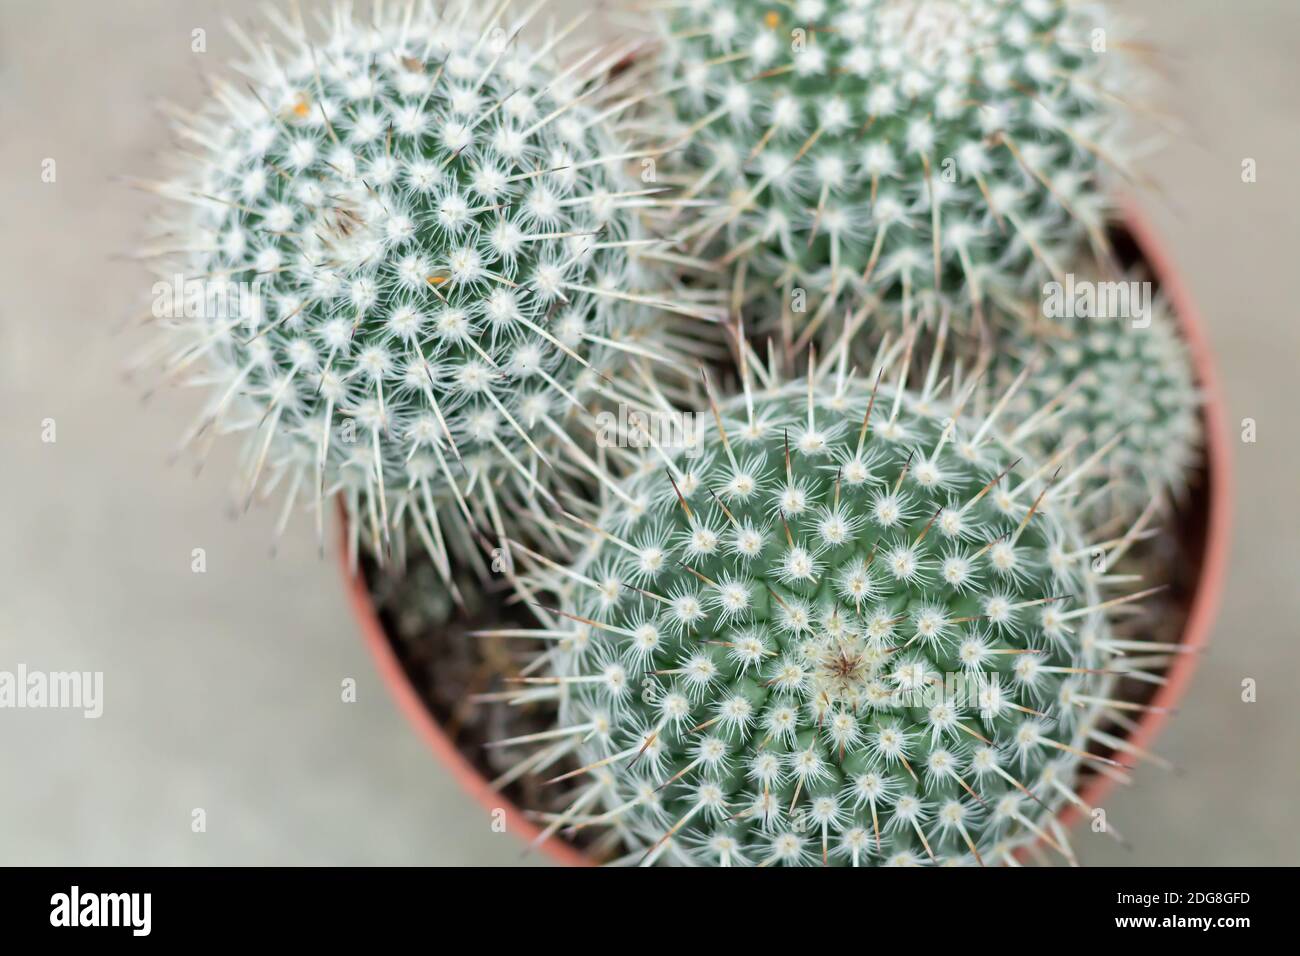 Top view of ball shaped potted cactus. Golden barrel cactus or Echinocactus grusonii plant Stock Photo